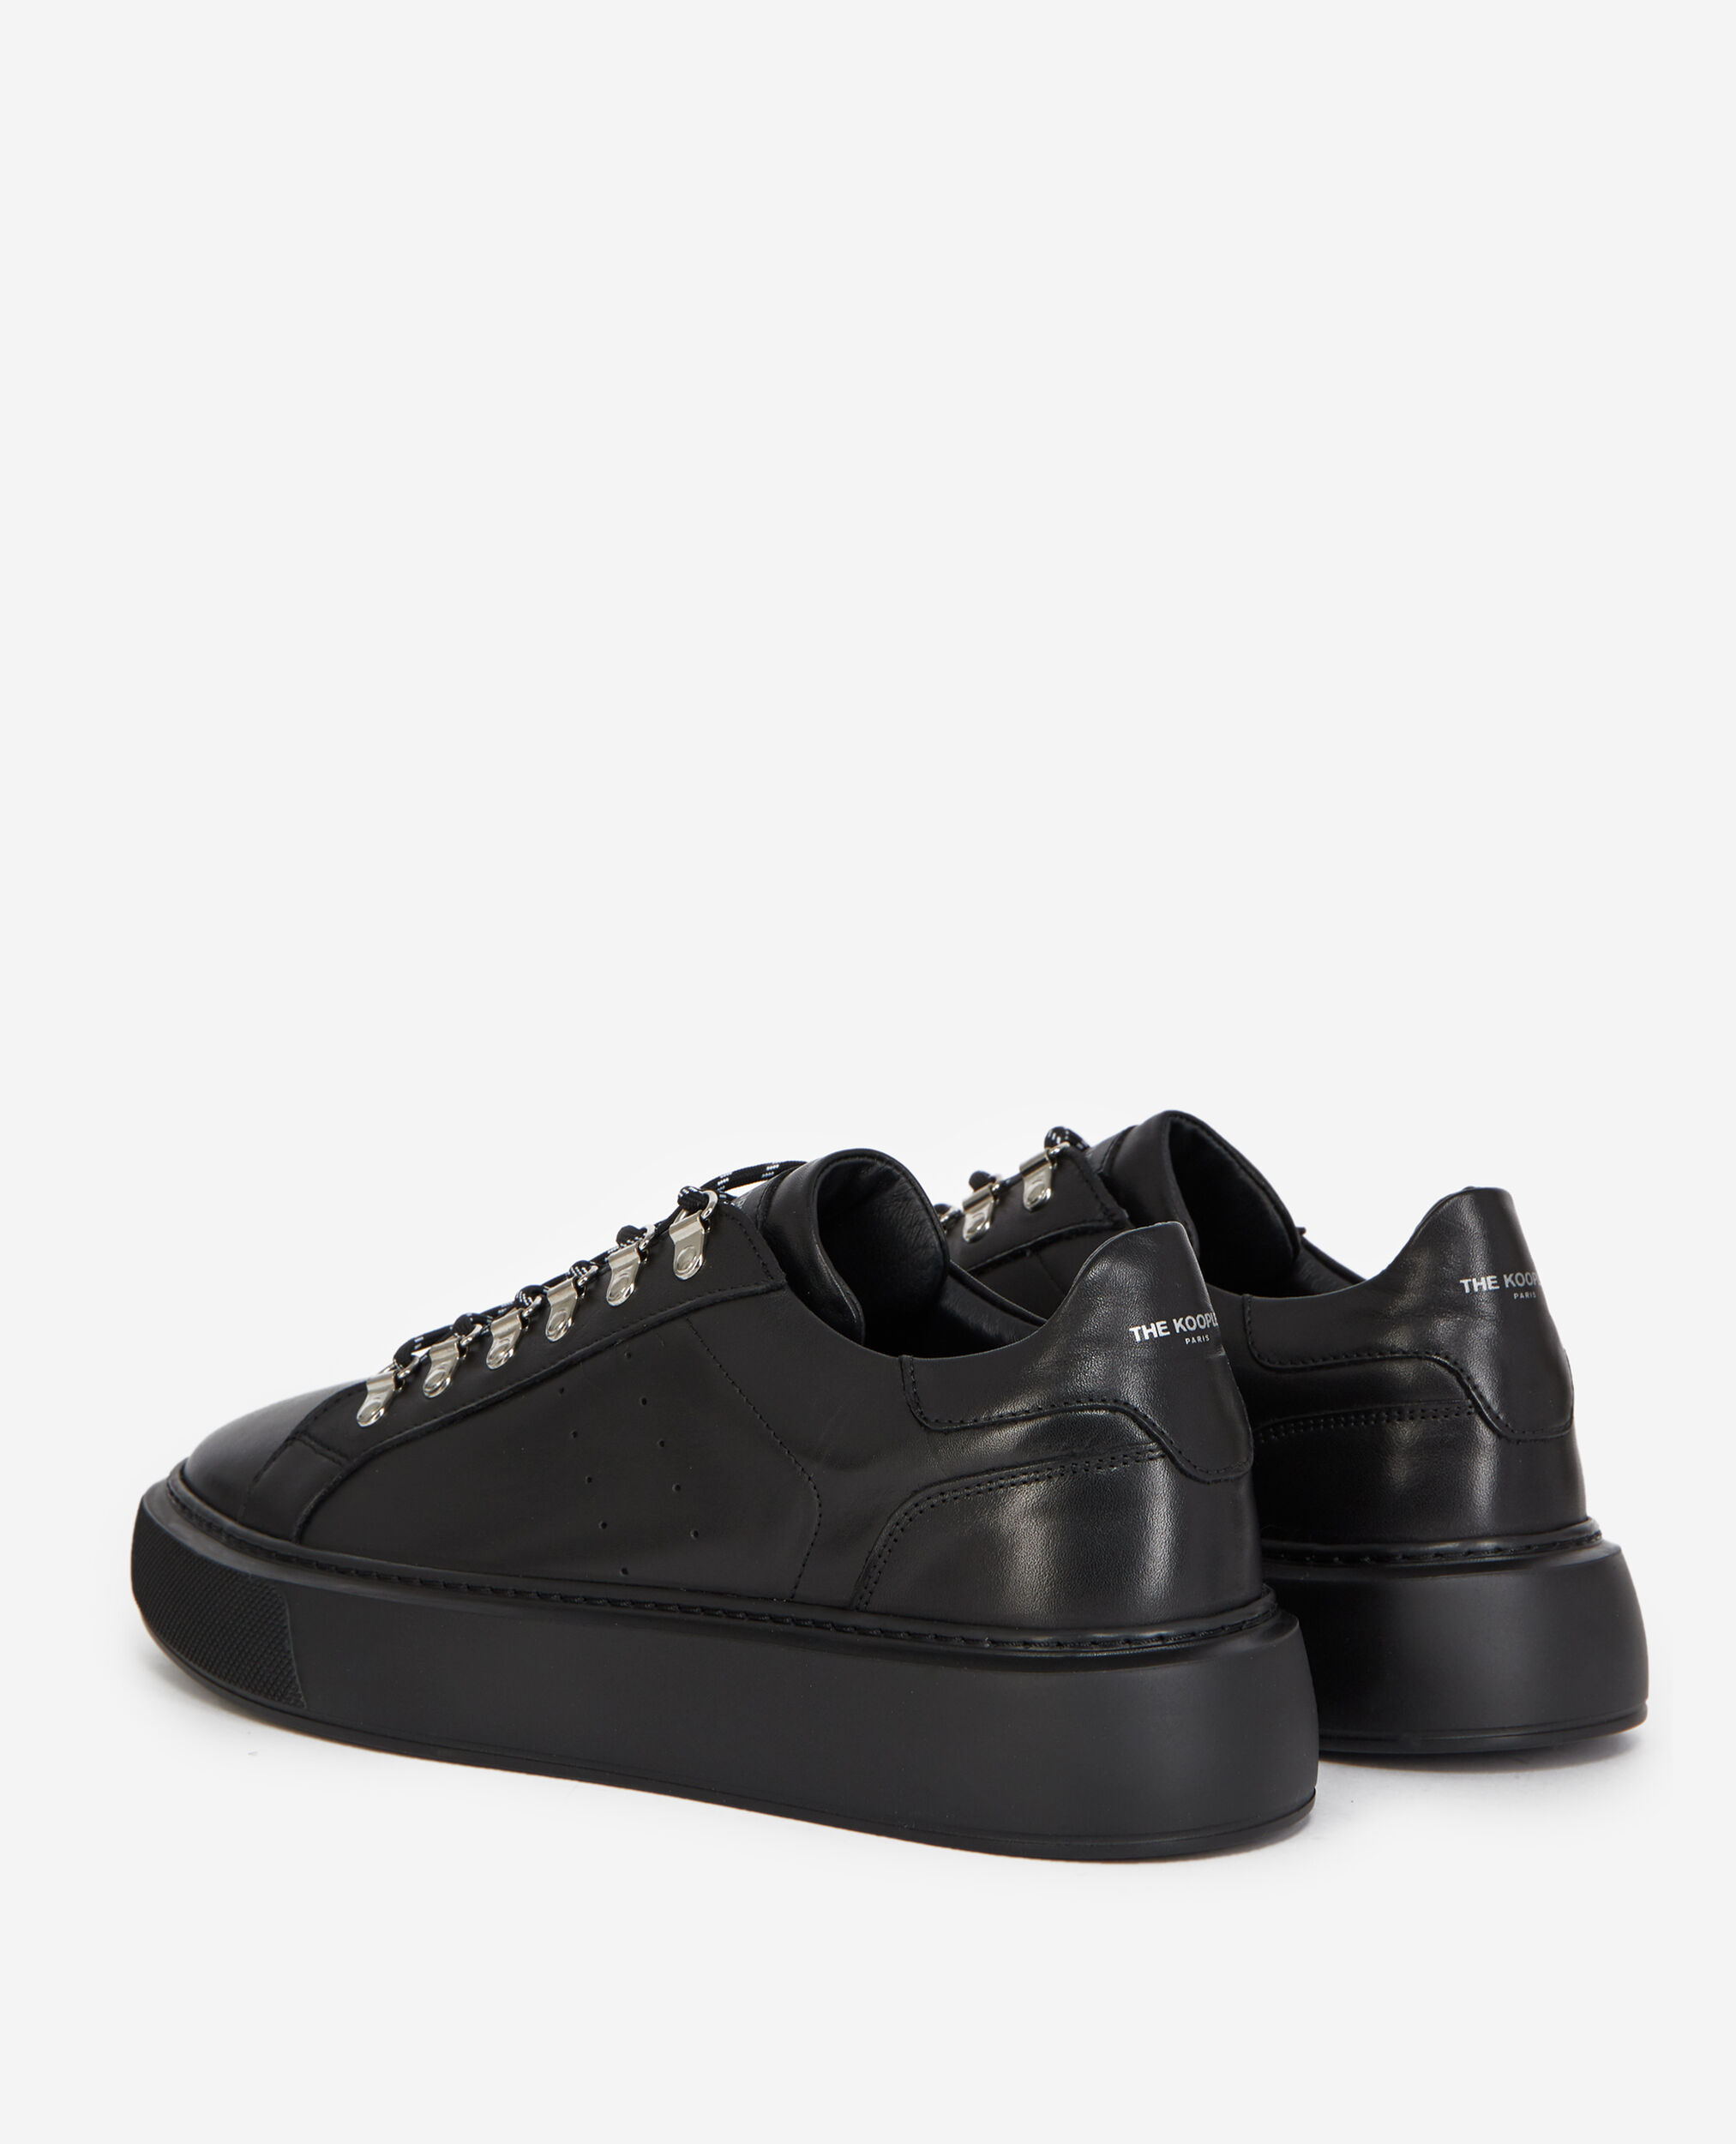 Wedge black sneakers in leather with eyelets, BLACK, hi-res image number null